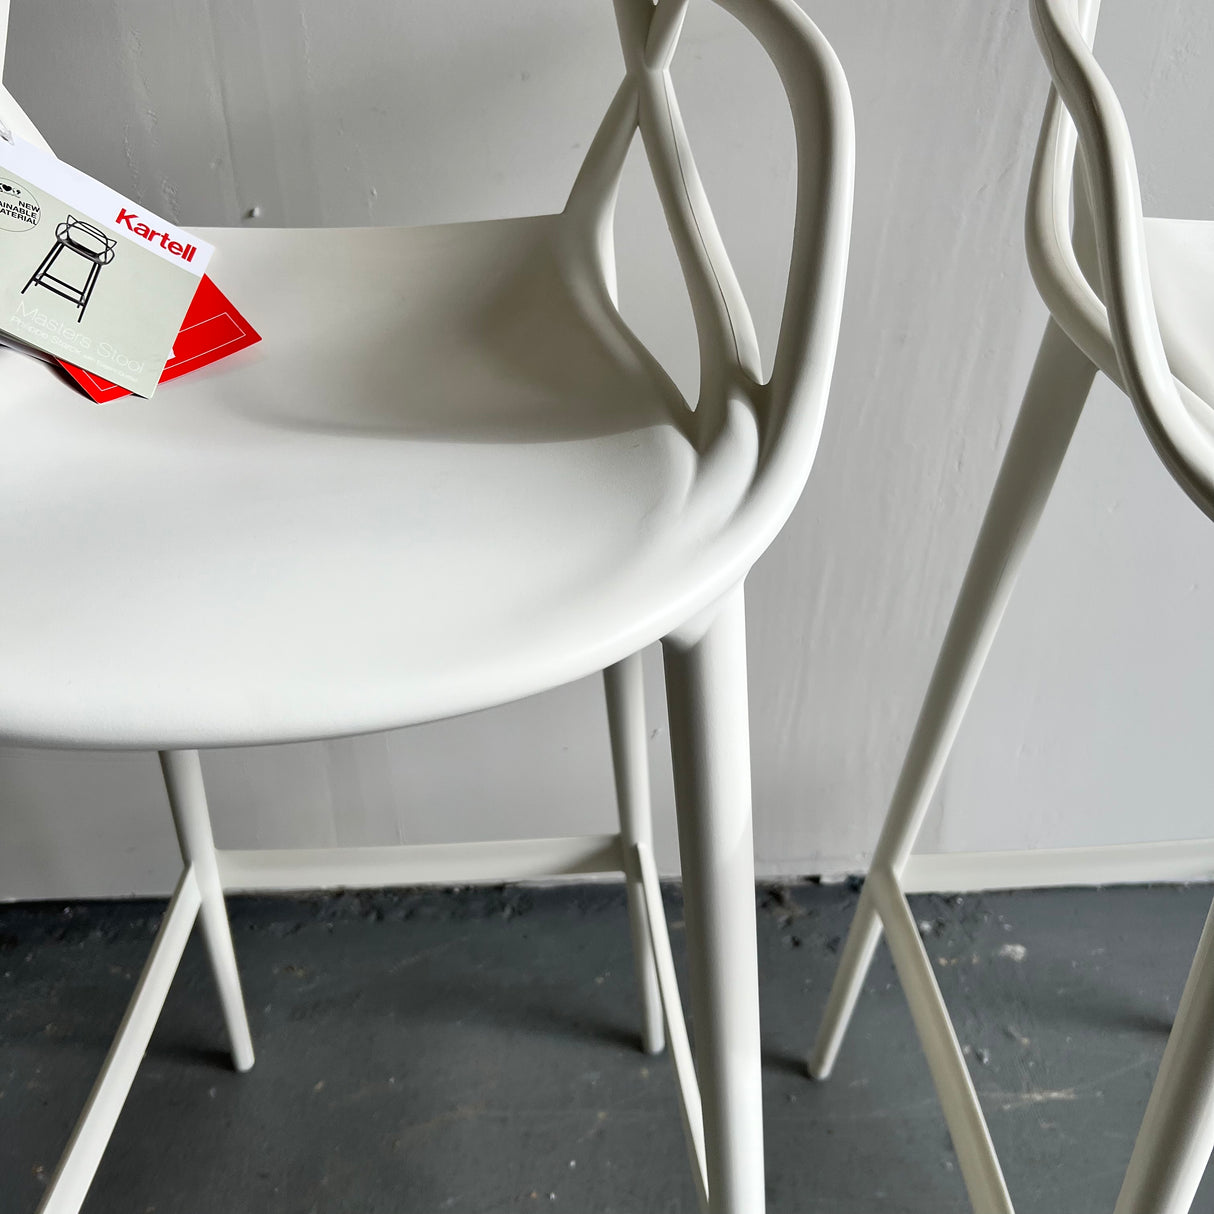 Masters Stool by Kartell - Set of Two